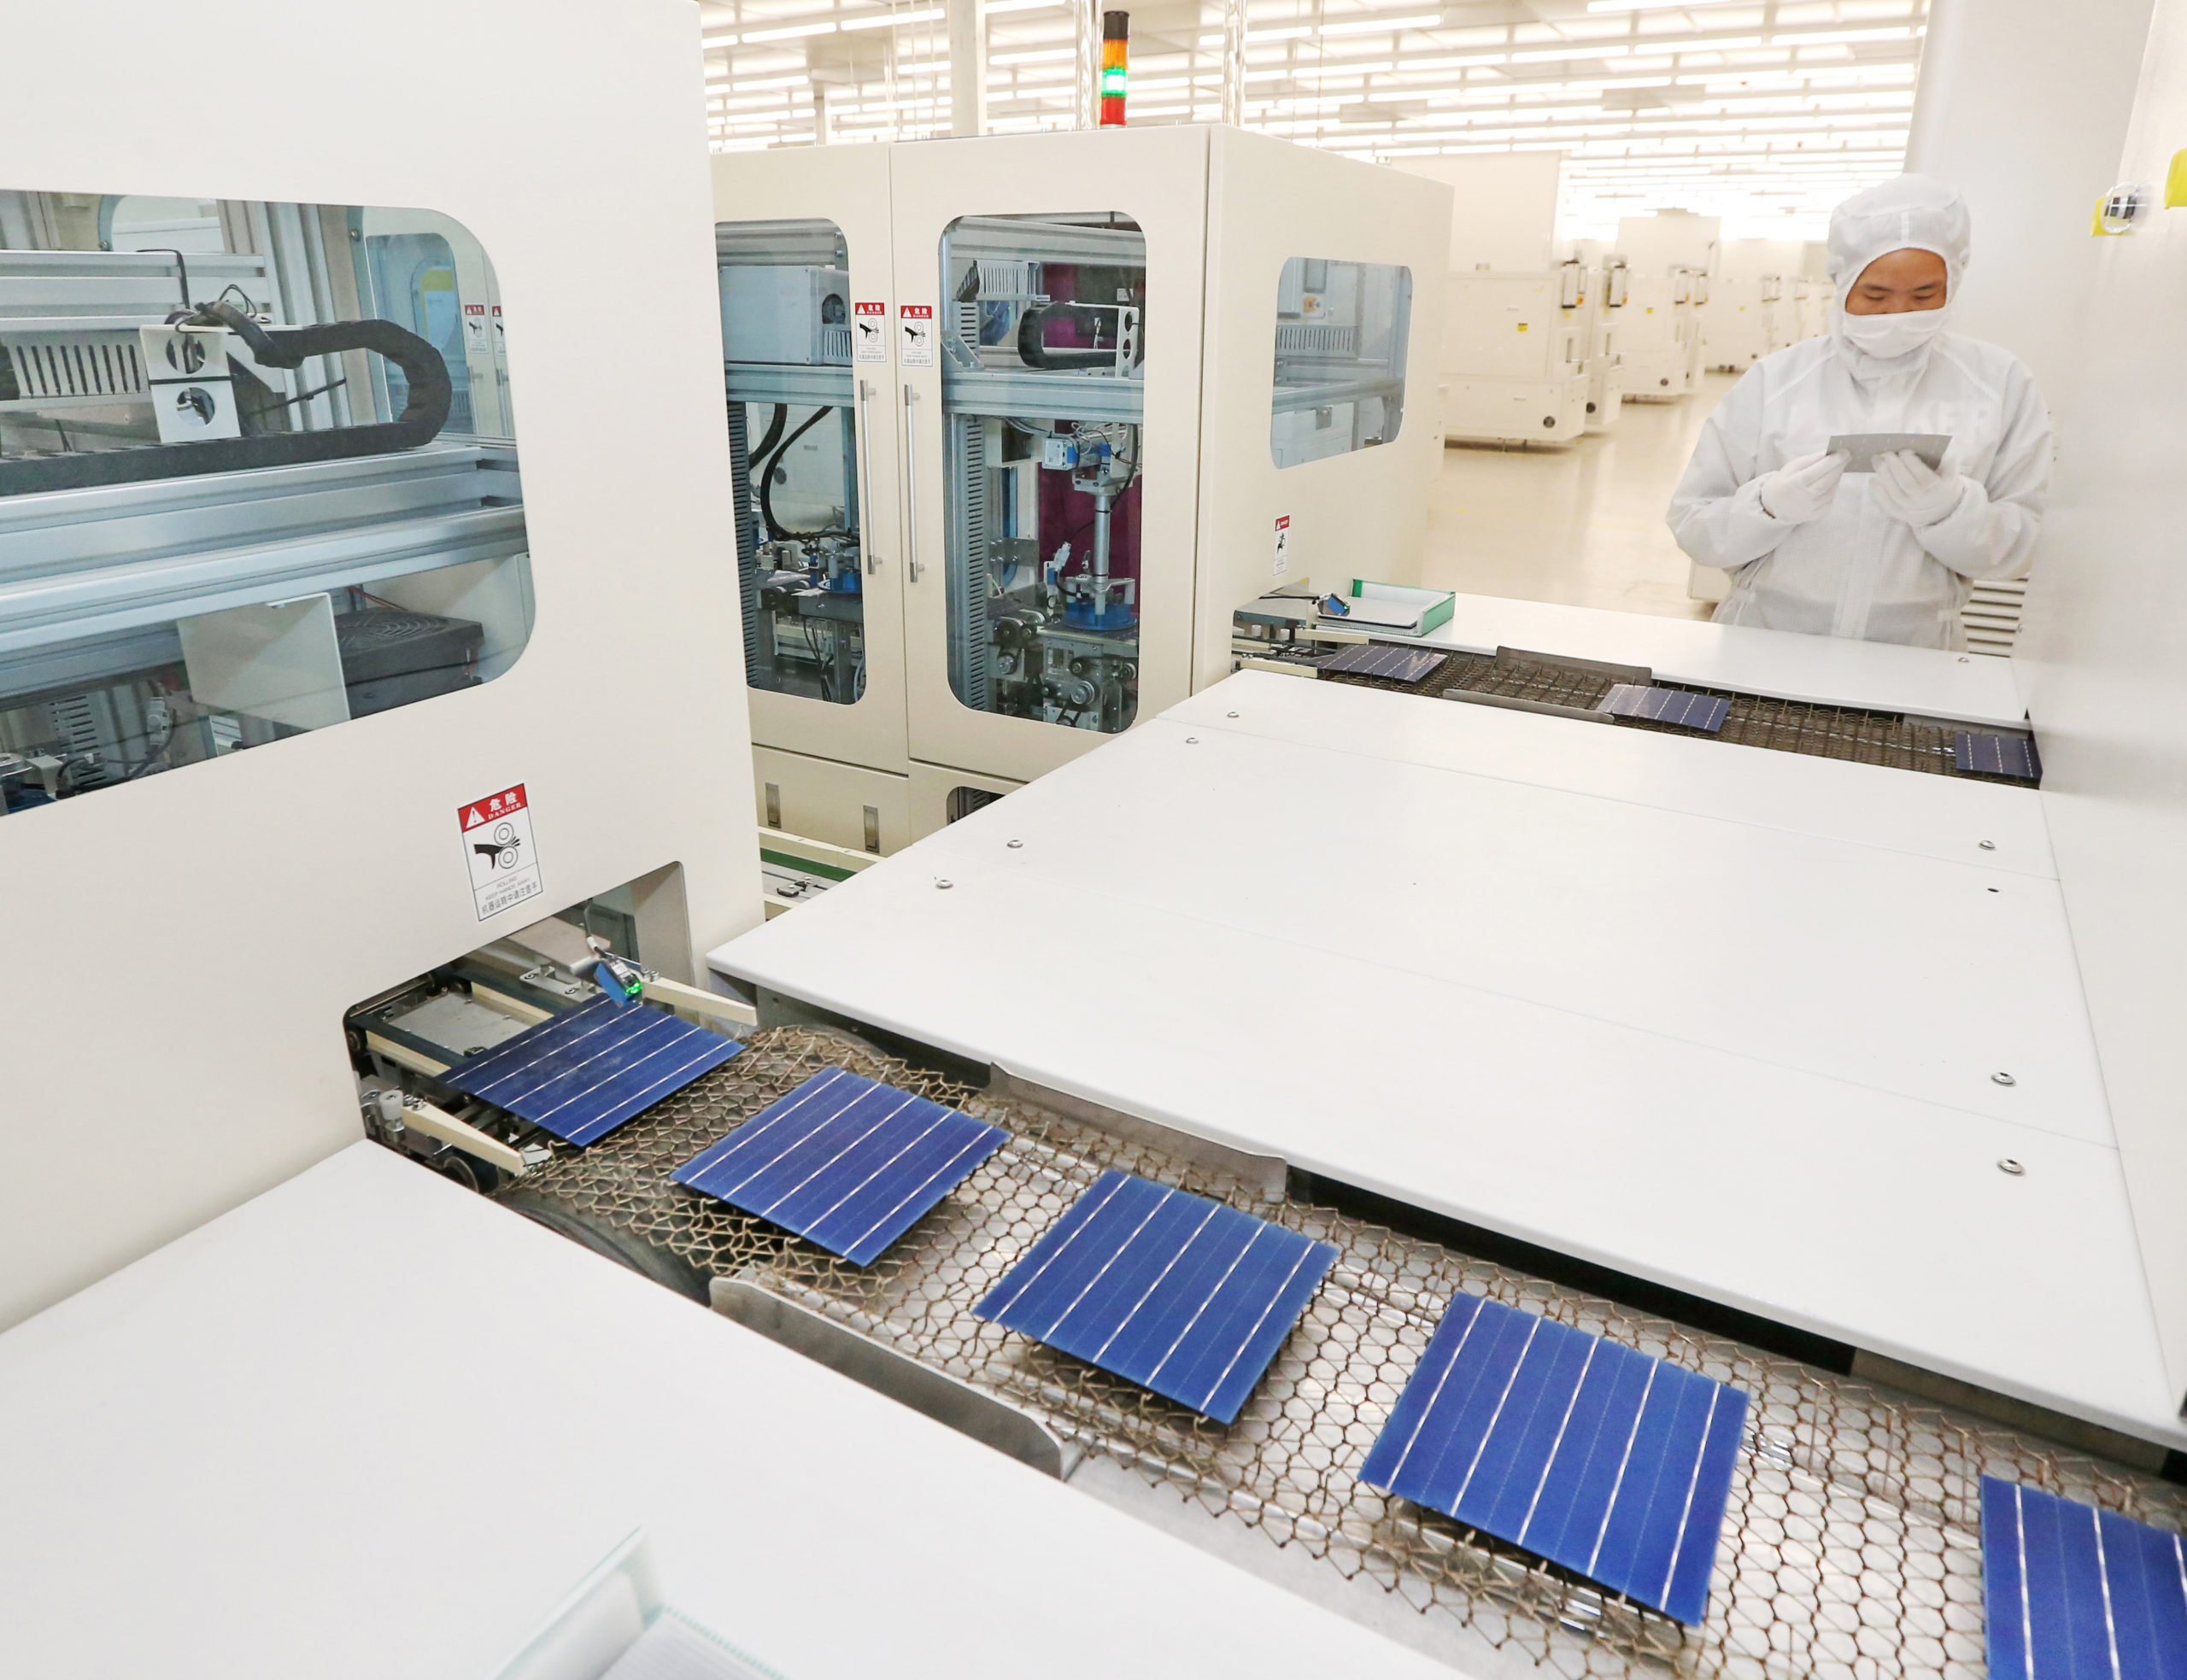 A Chinese worker inspects solar cells at a factory in Nantong on March 28, 2018. (AFP via Getty Images)